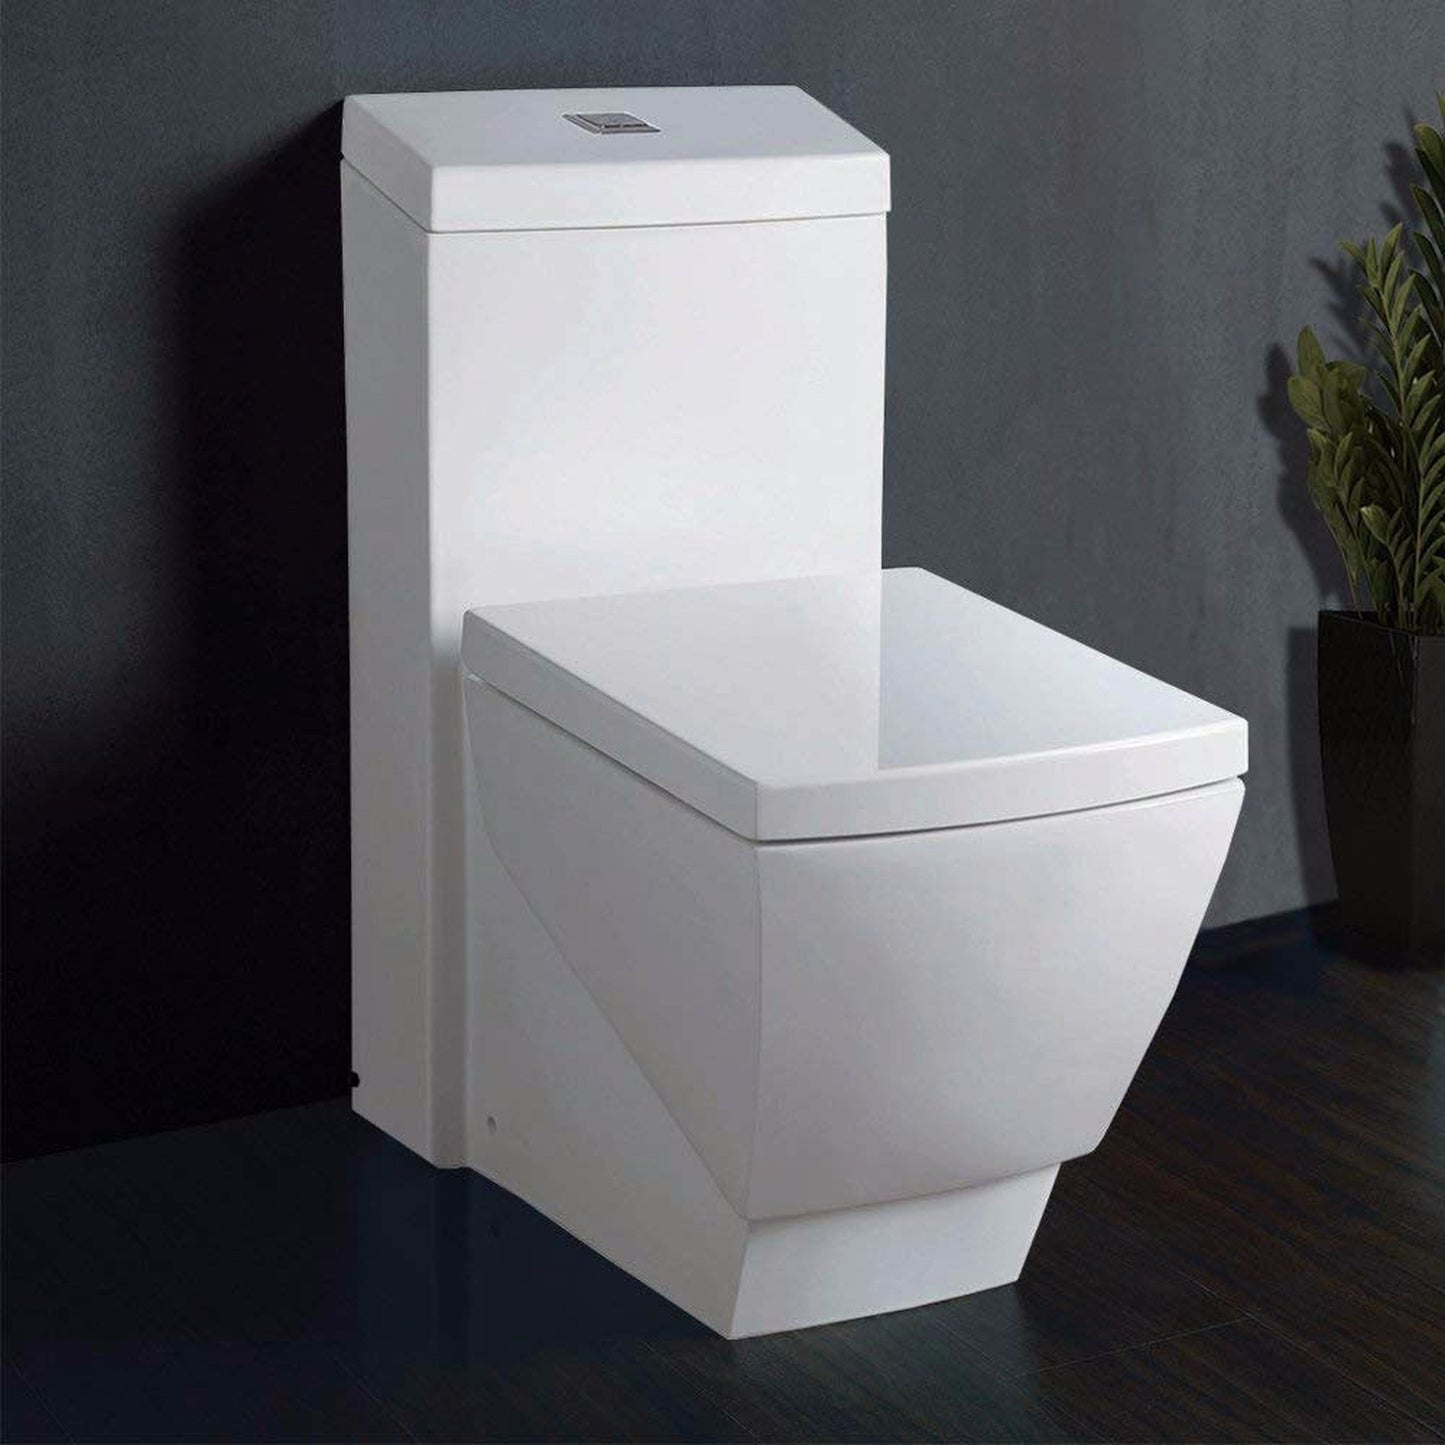 WoodBridge T-0020 White Dual Flush Elongated One Piece Toilet Chair Height With Soft Closing Seat, Deluxe Square Design